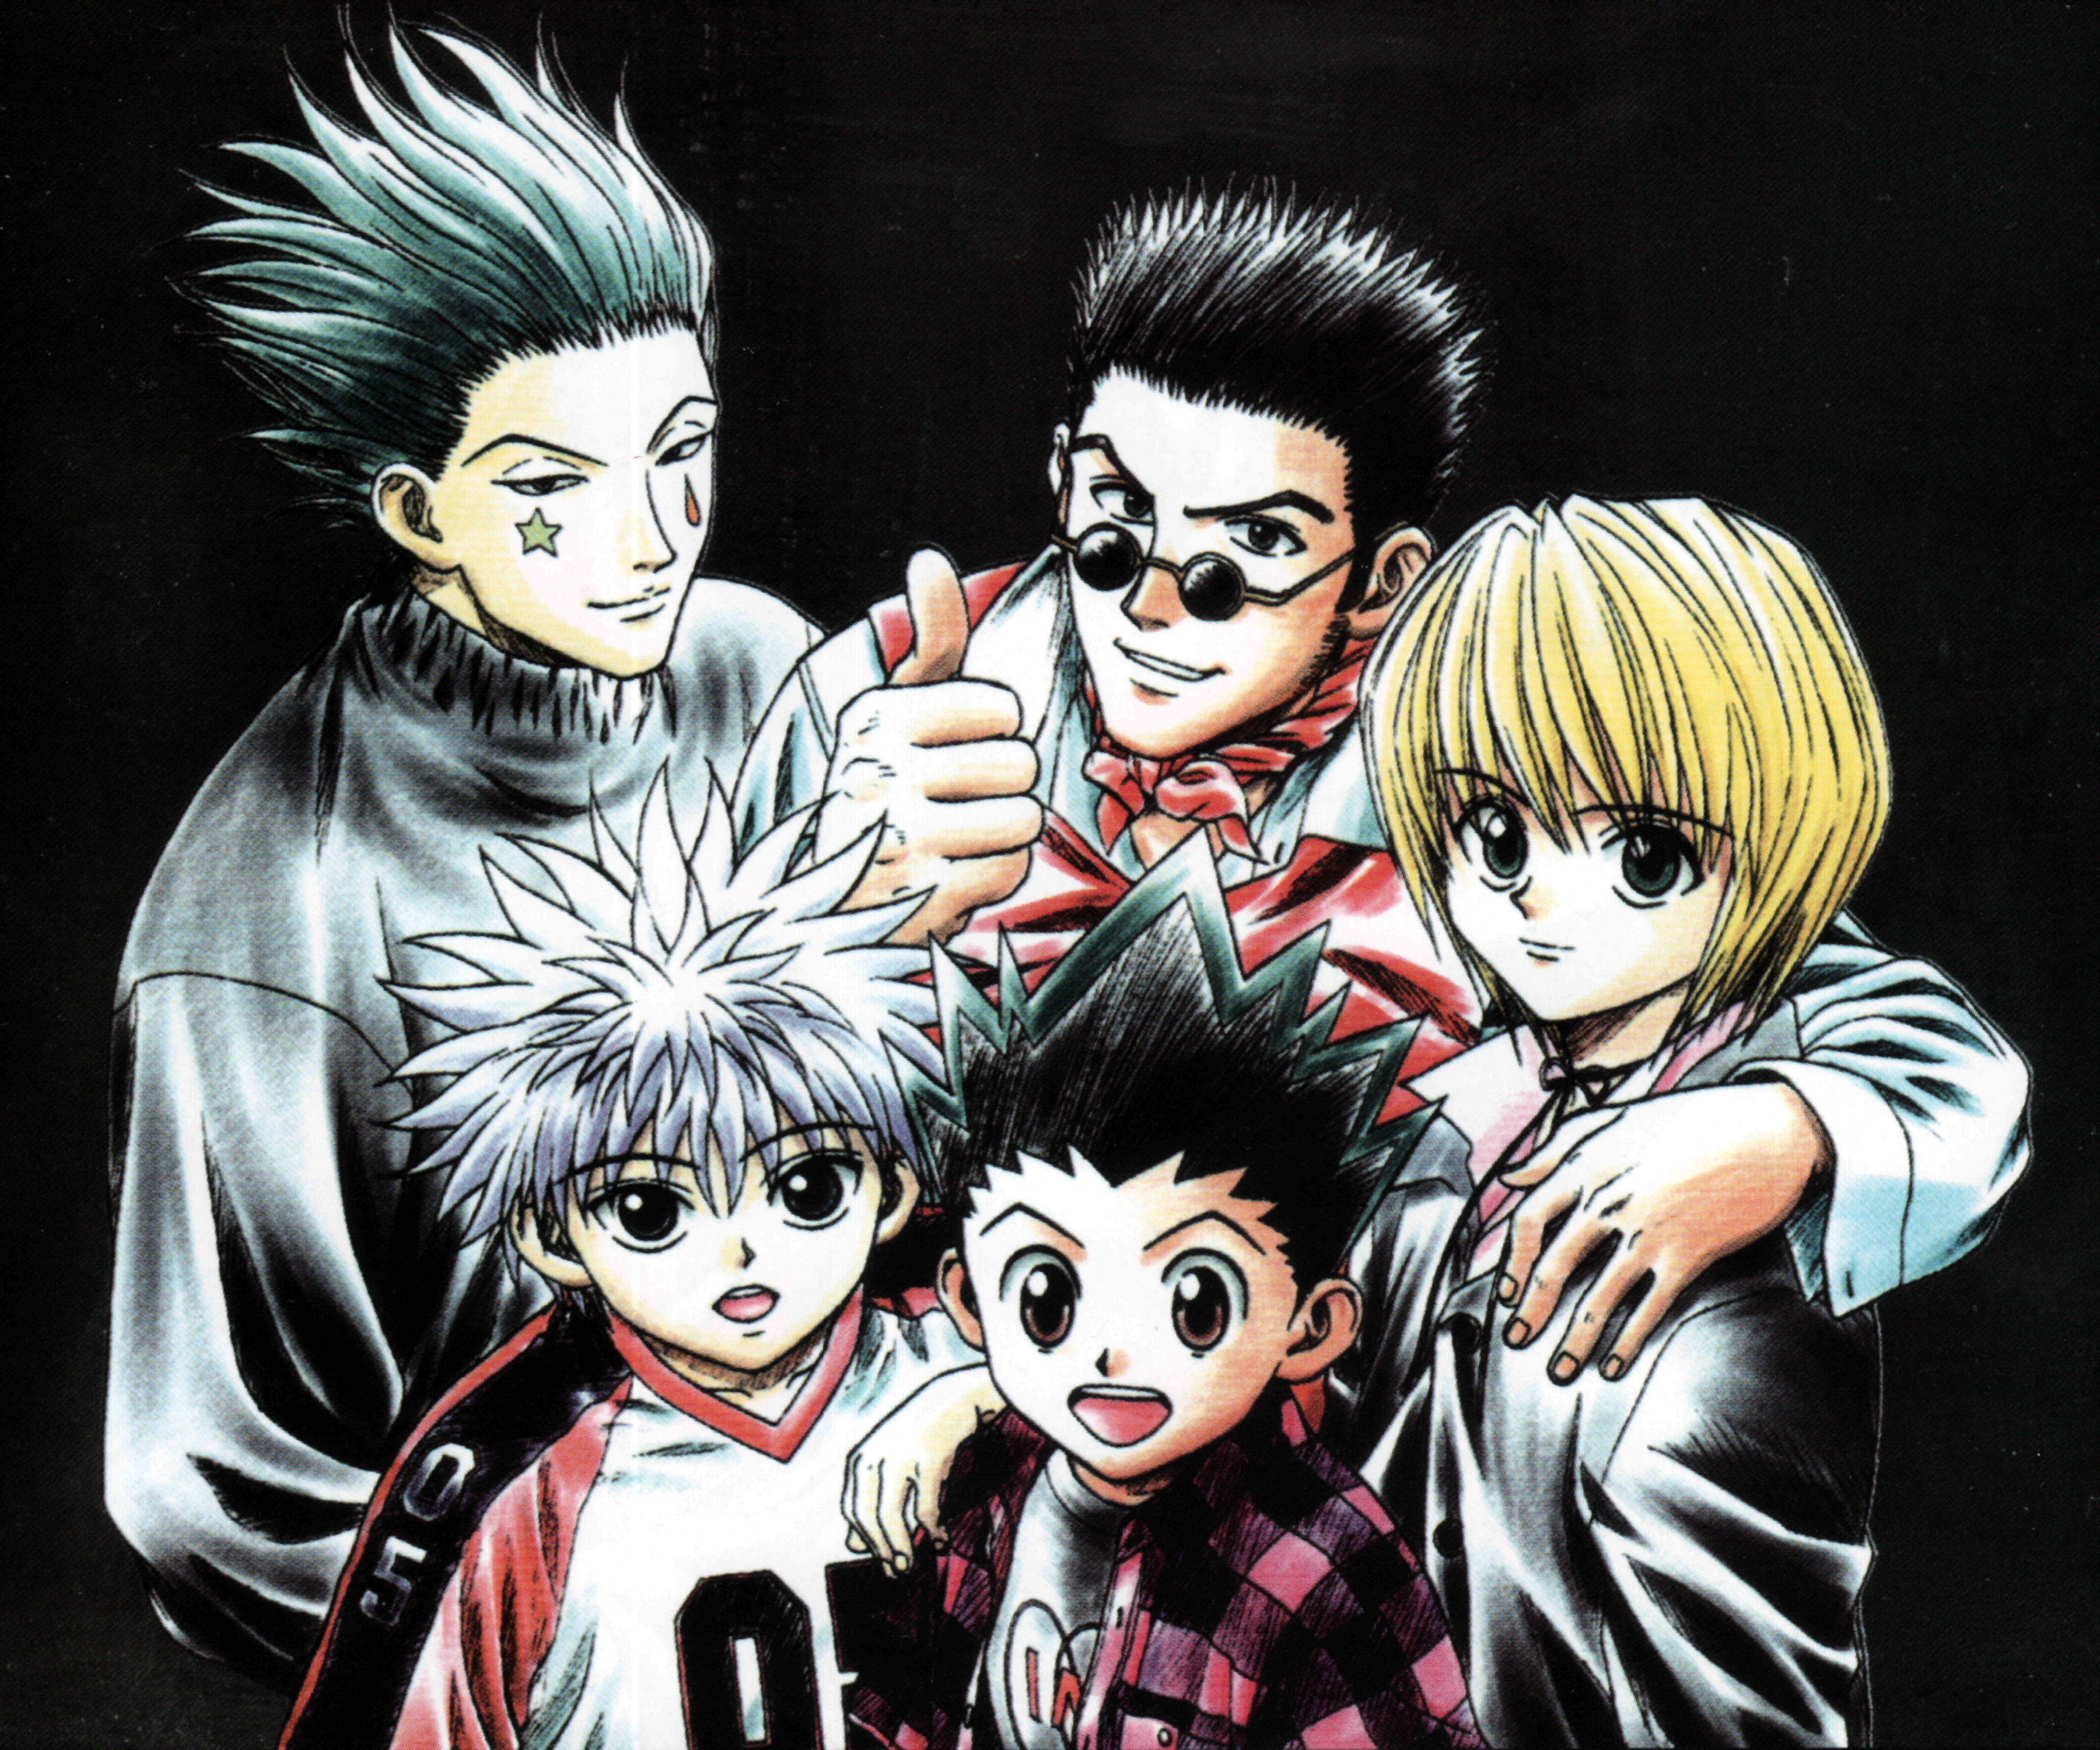 Download Hunter X Hunter wallpapers for mobile phone, free